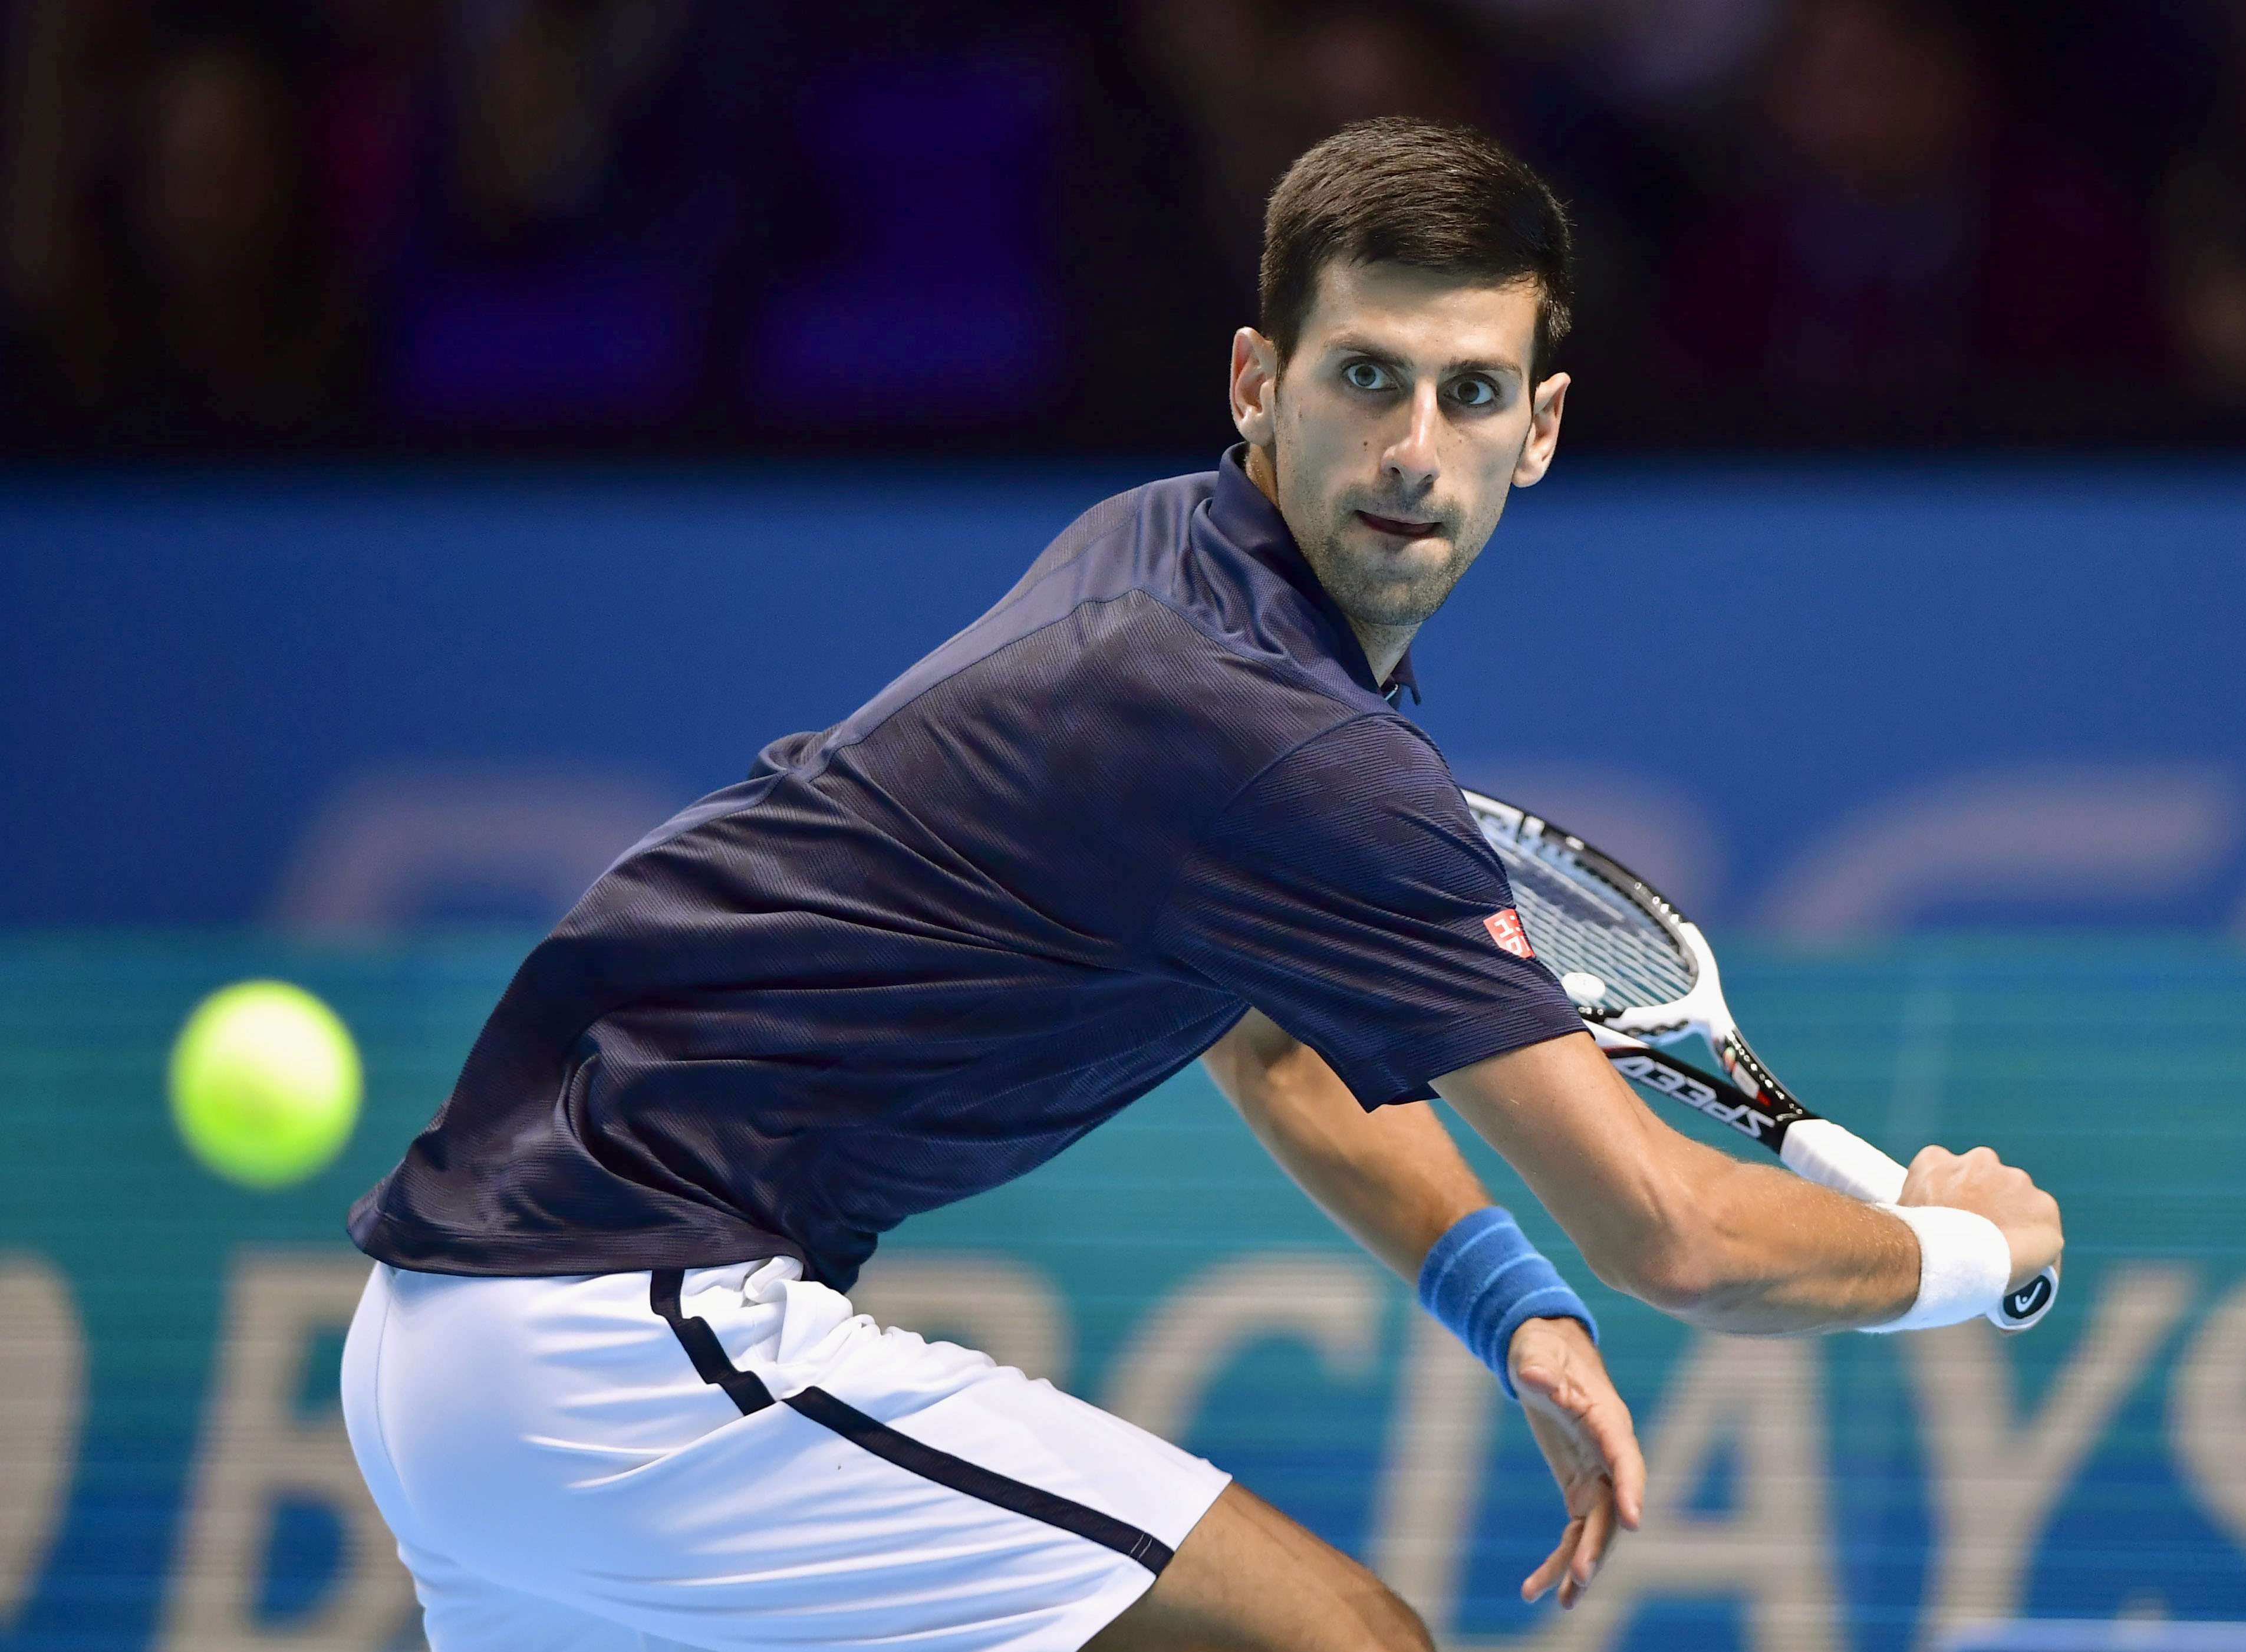 Novak Djokovic prepares to hit a return during his win over Milos Raonic at the ATP World Tour Finals. Photo: Kyodo